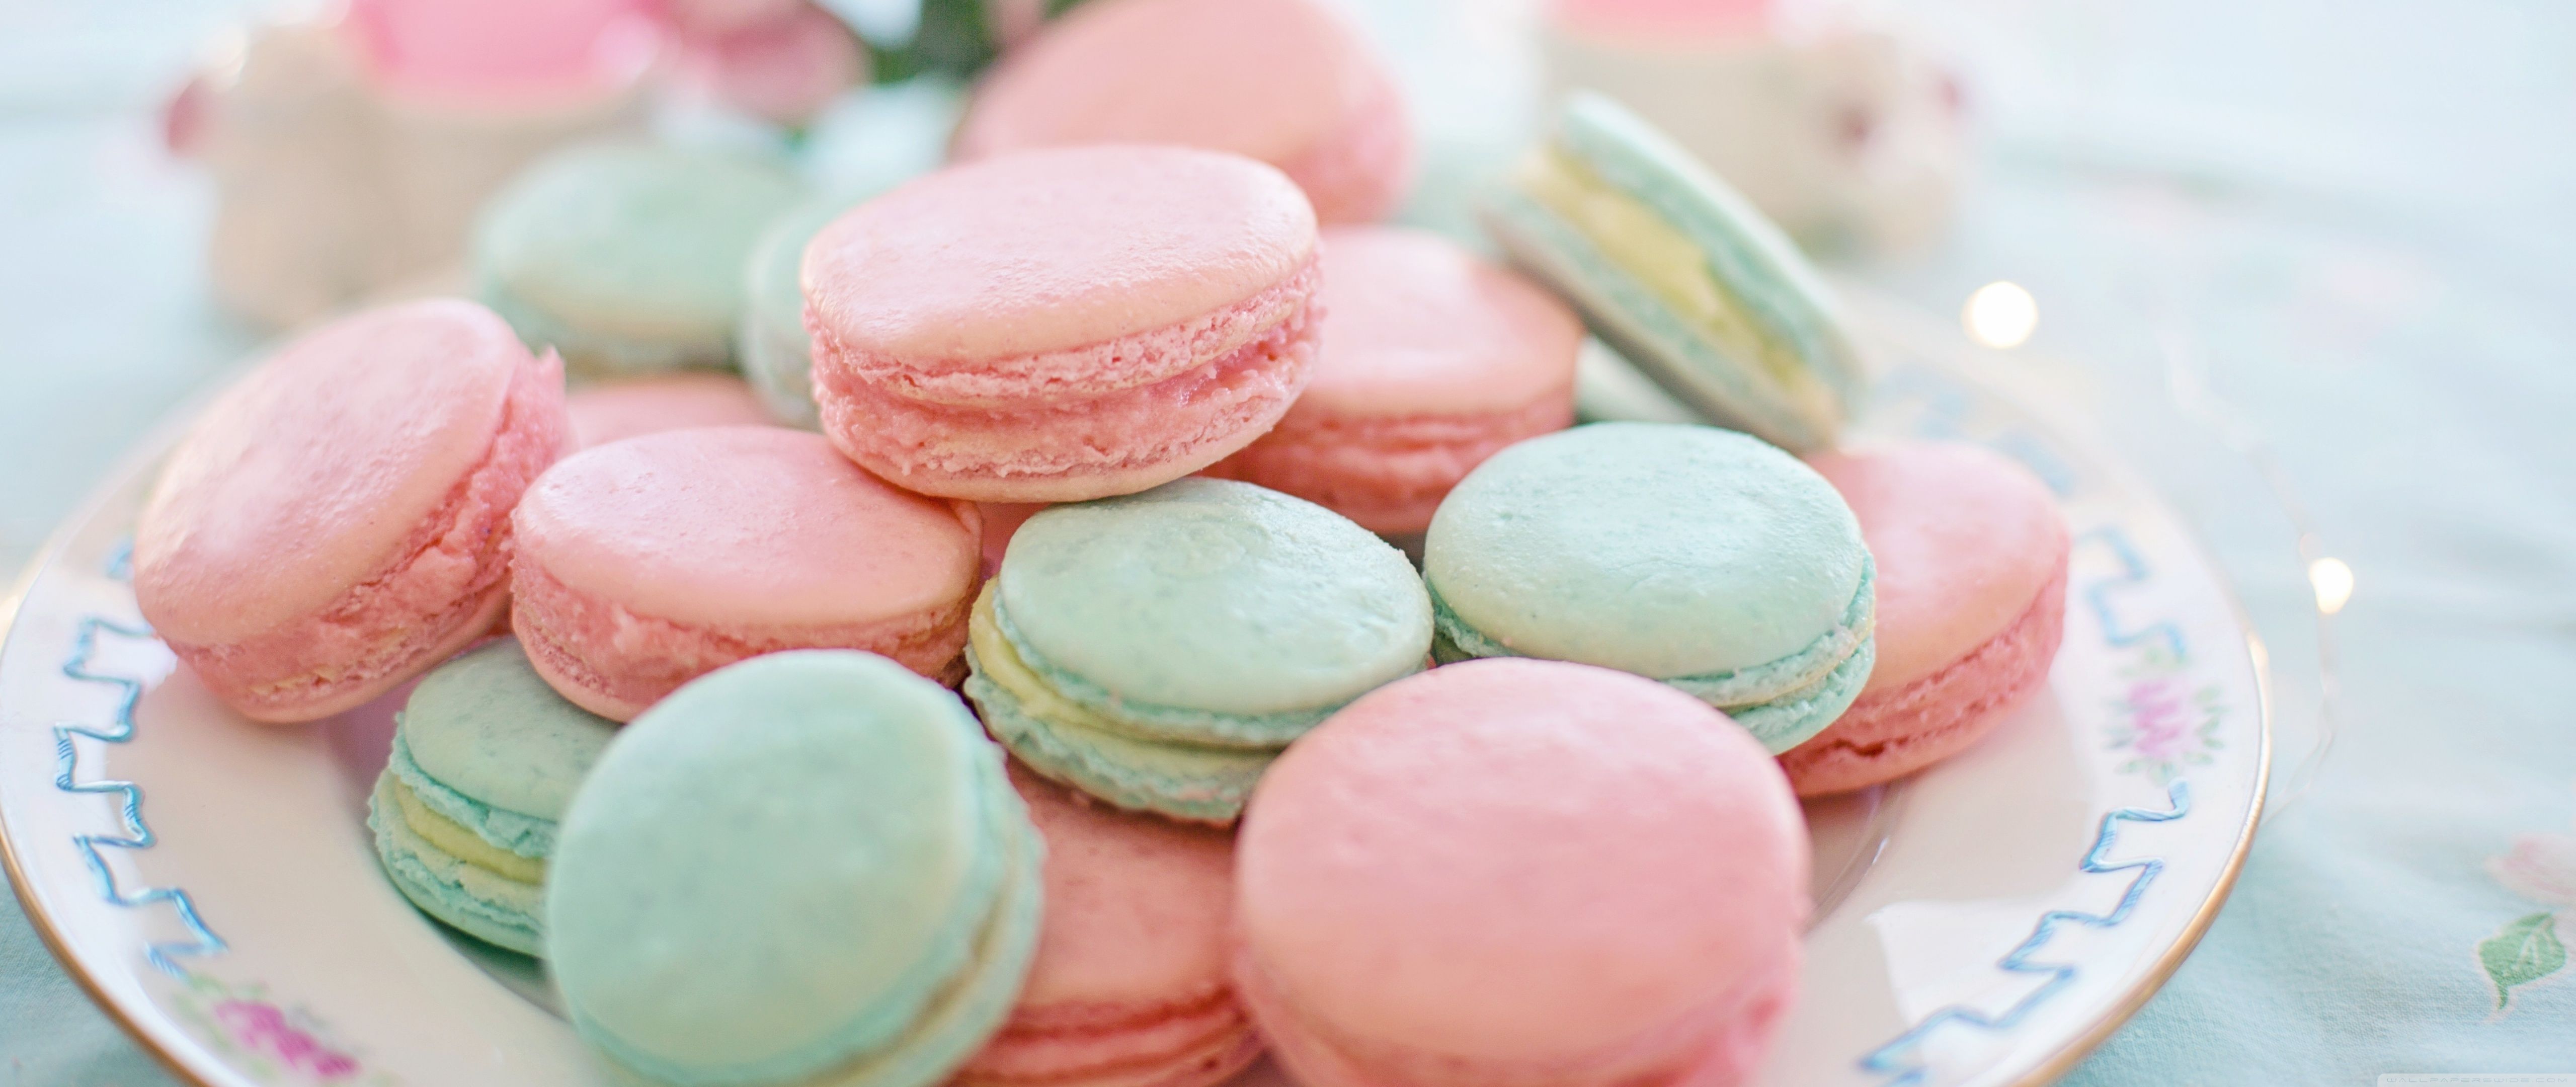 Macaroons on a plate, some pink and some blue, with a blue tablecloth. - Pastel, macarons